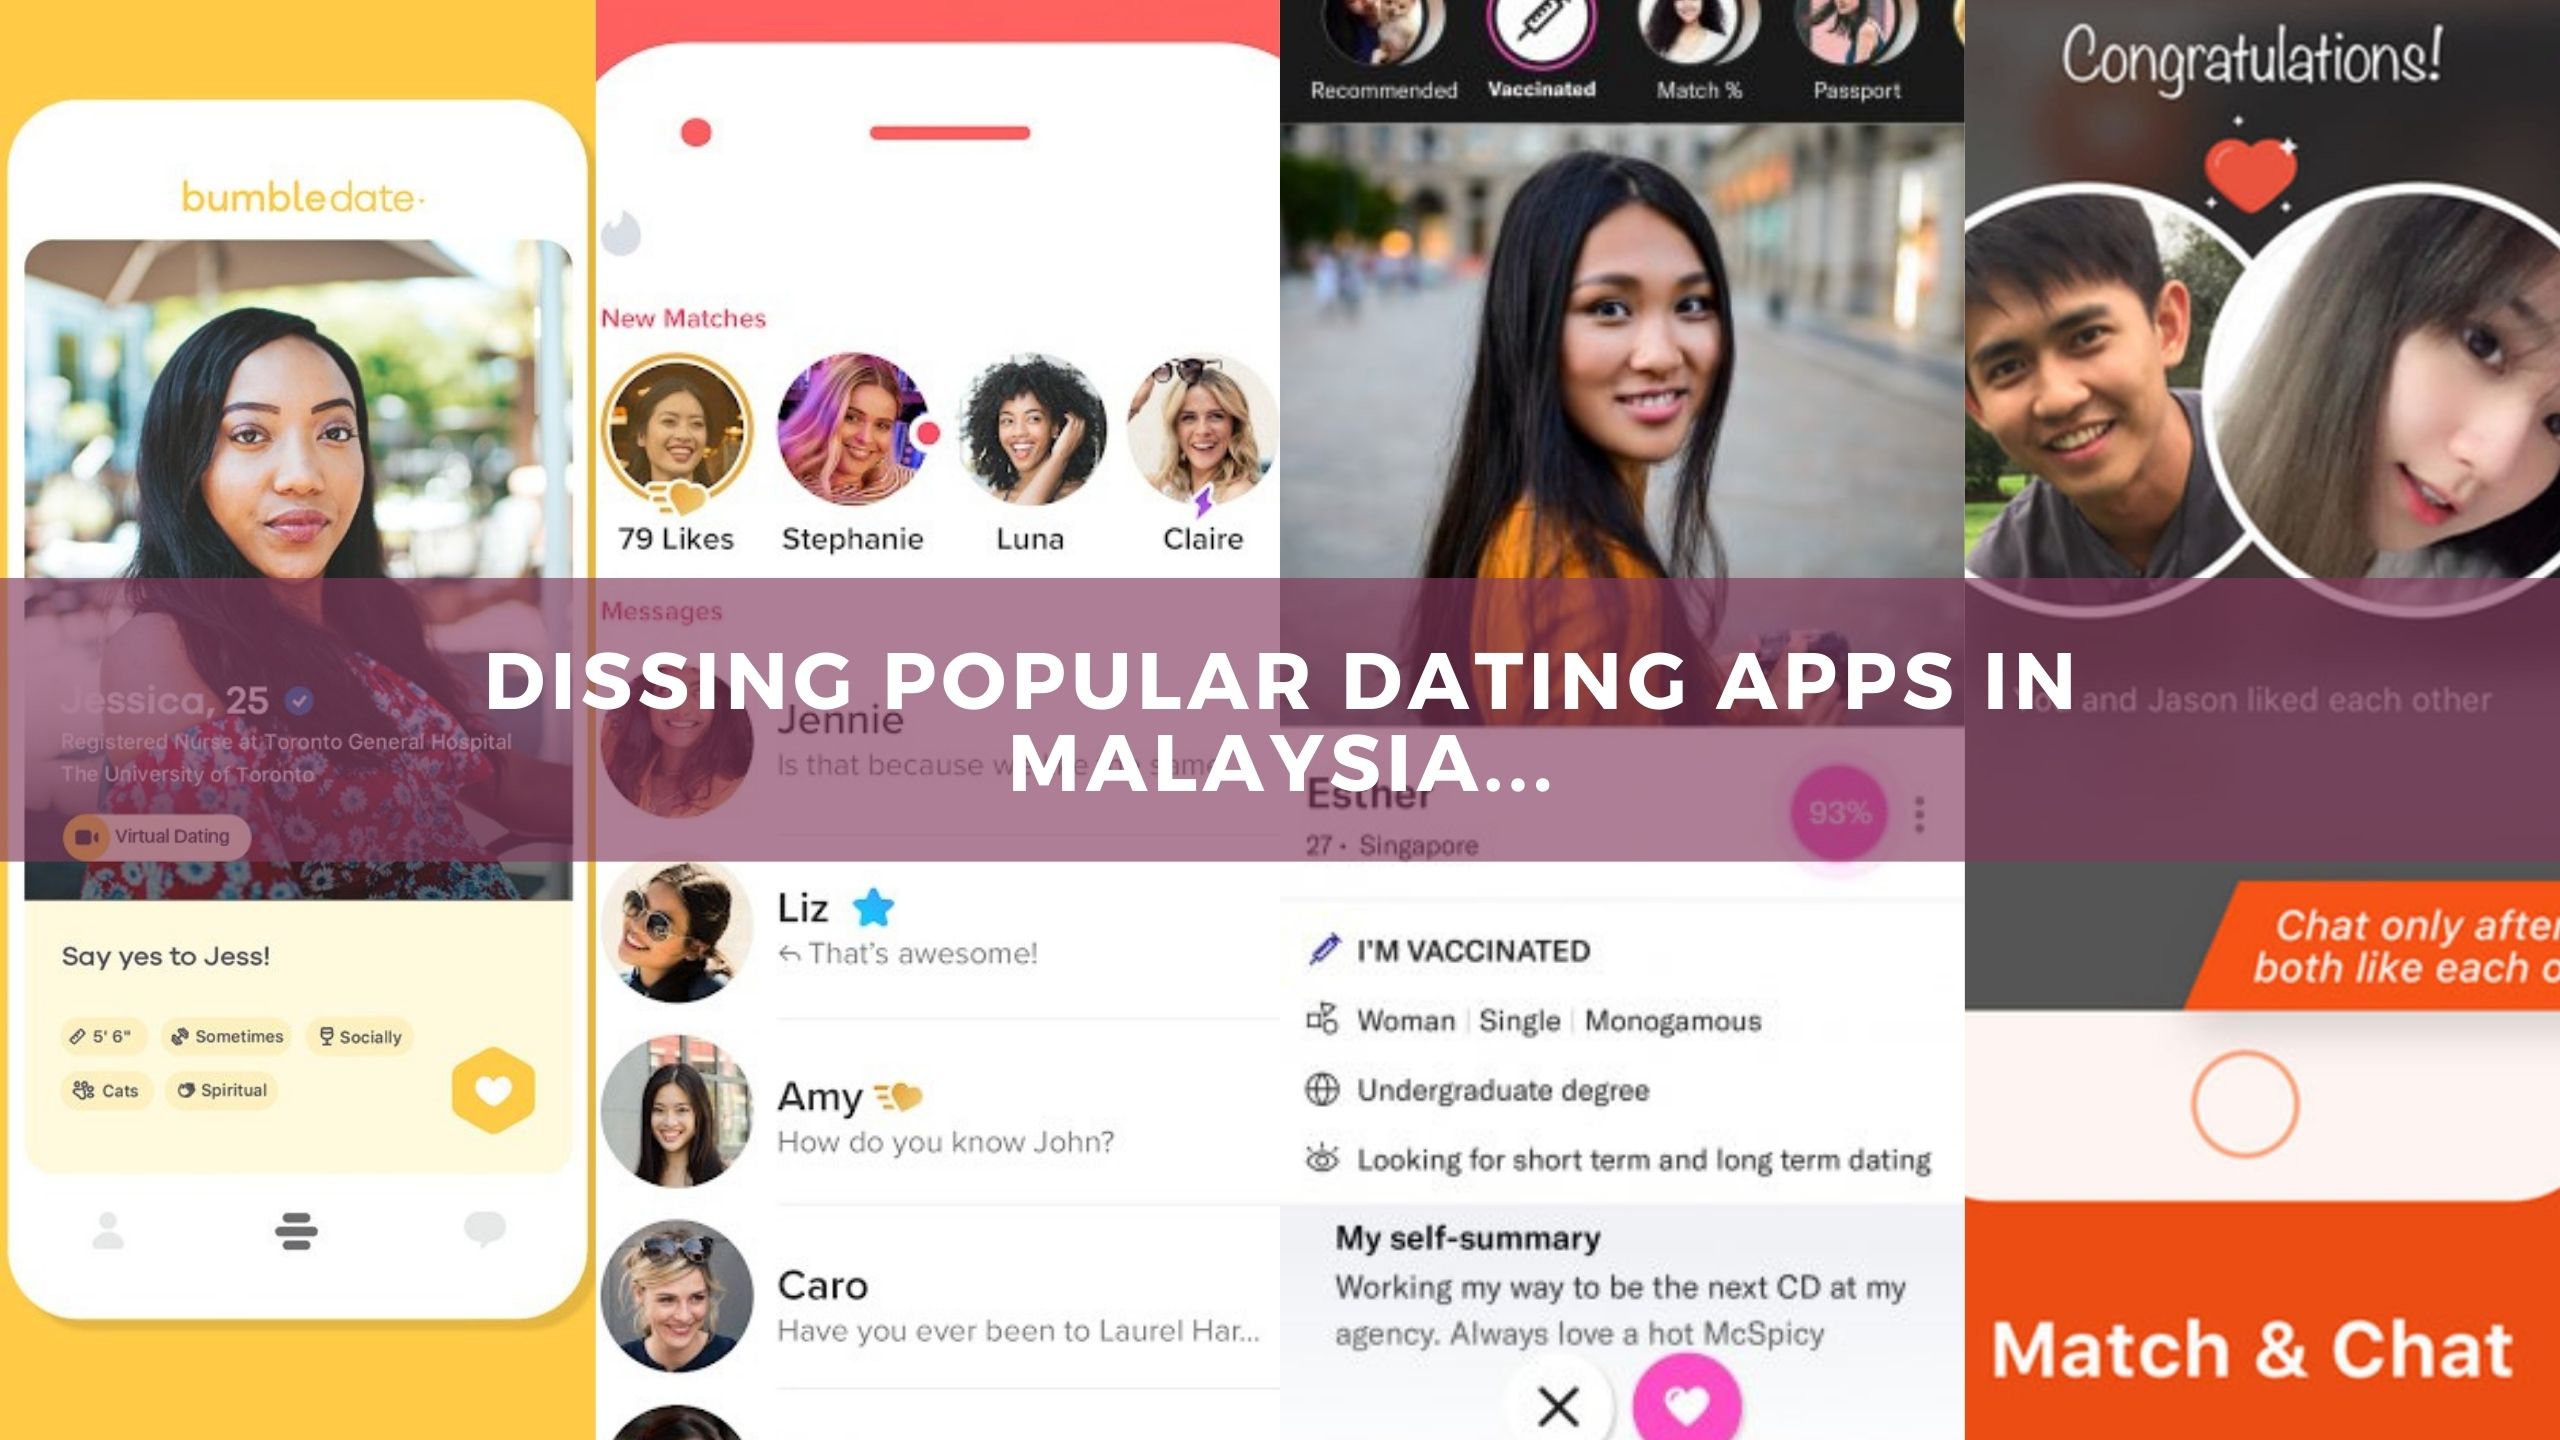 Malaysia dating 2021 apps Top List: